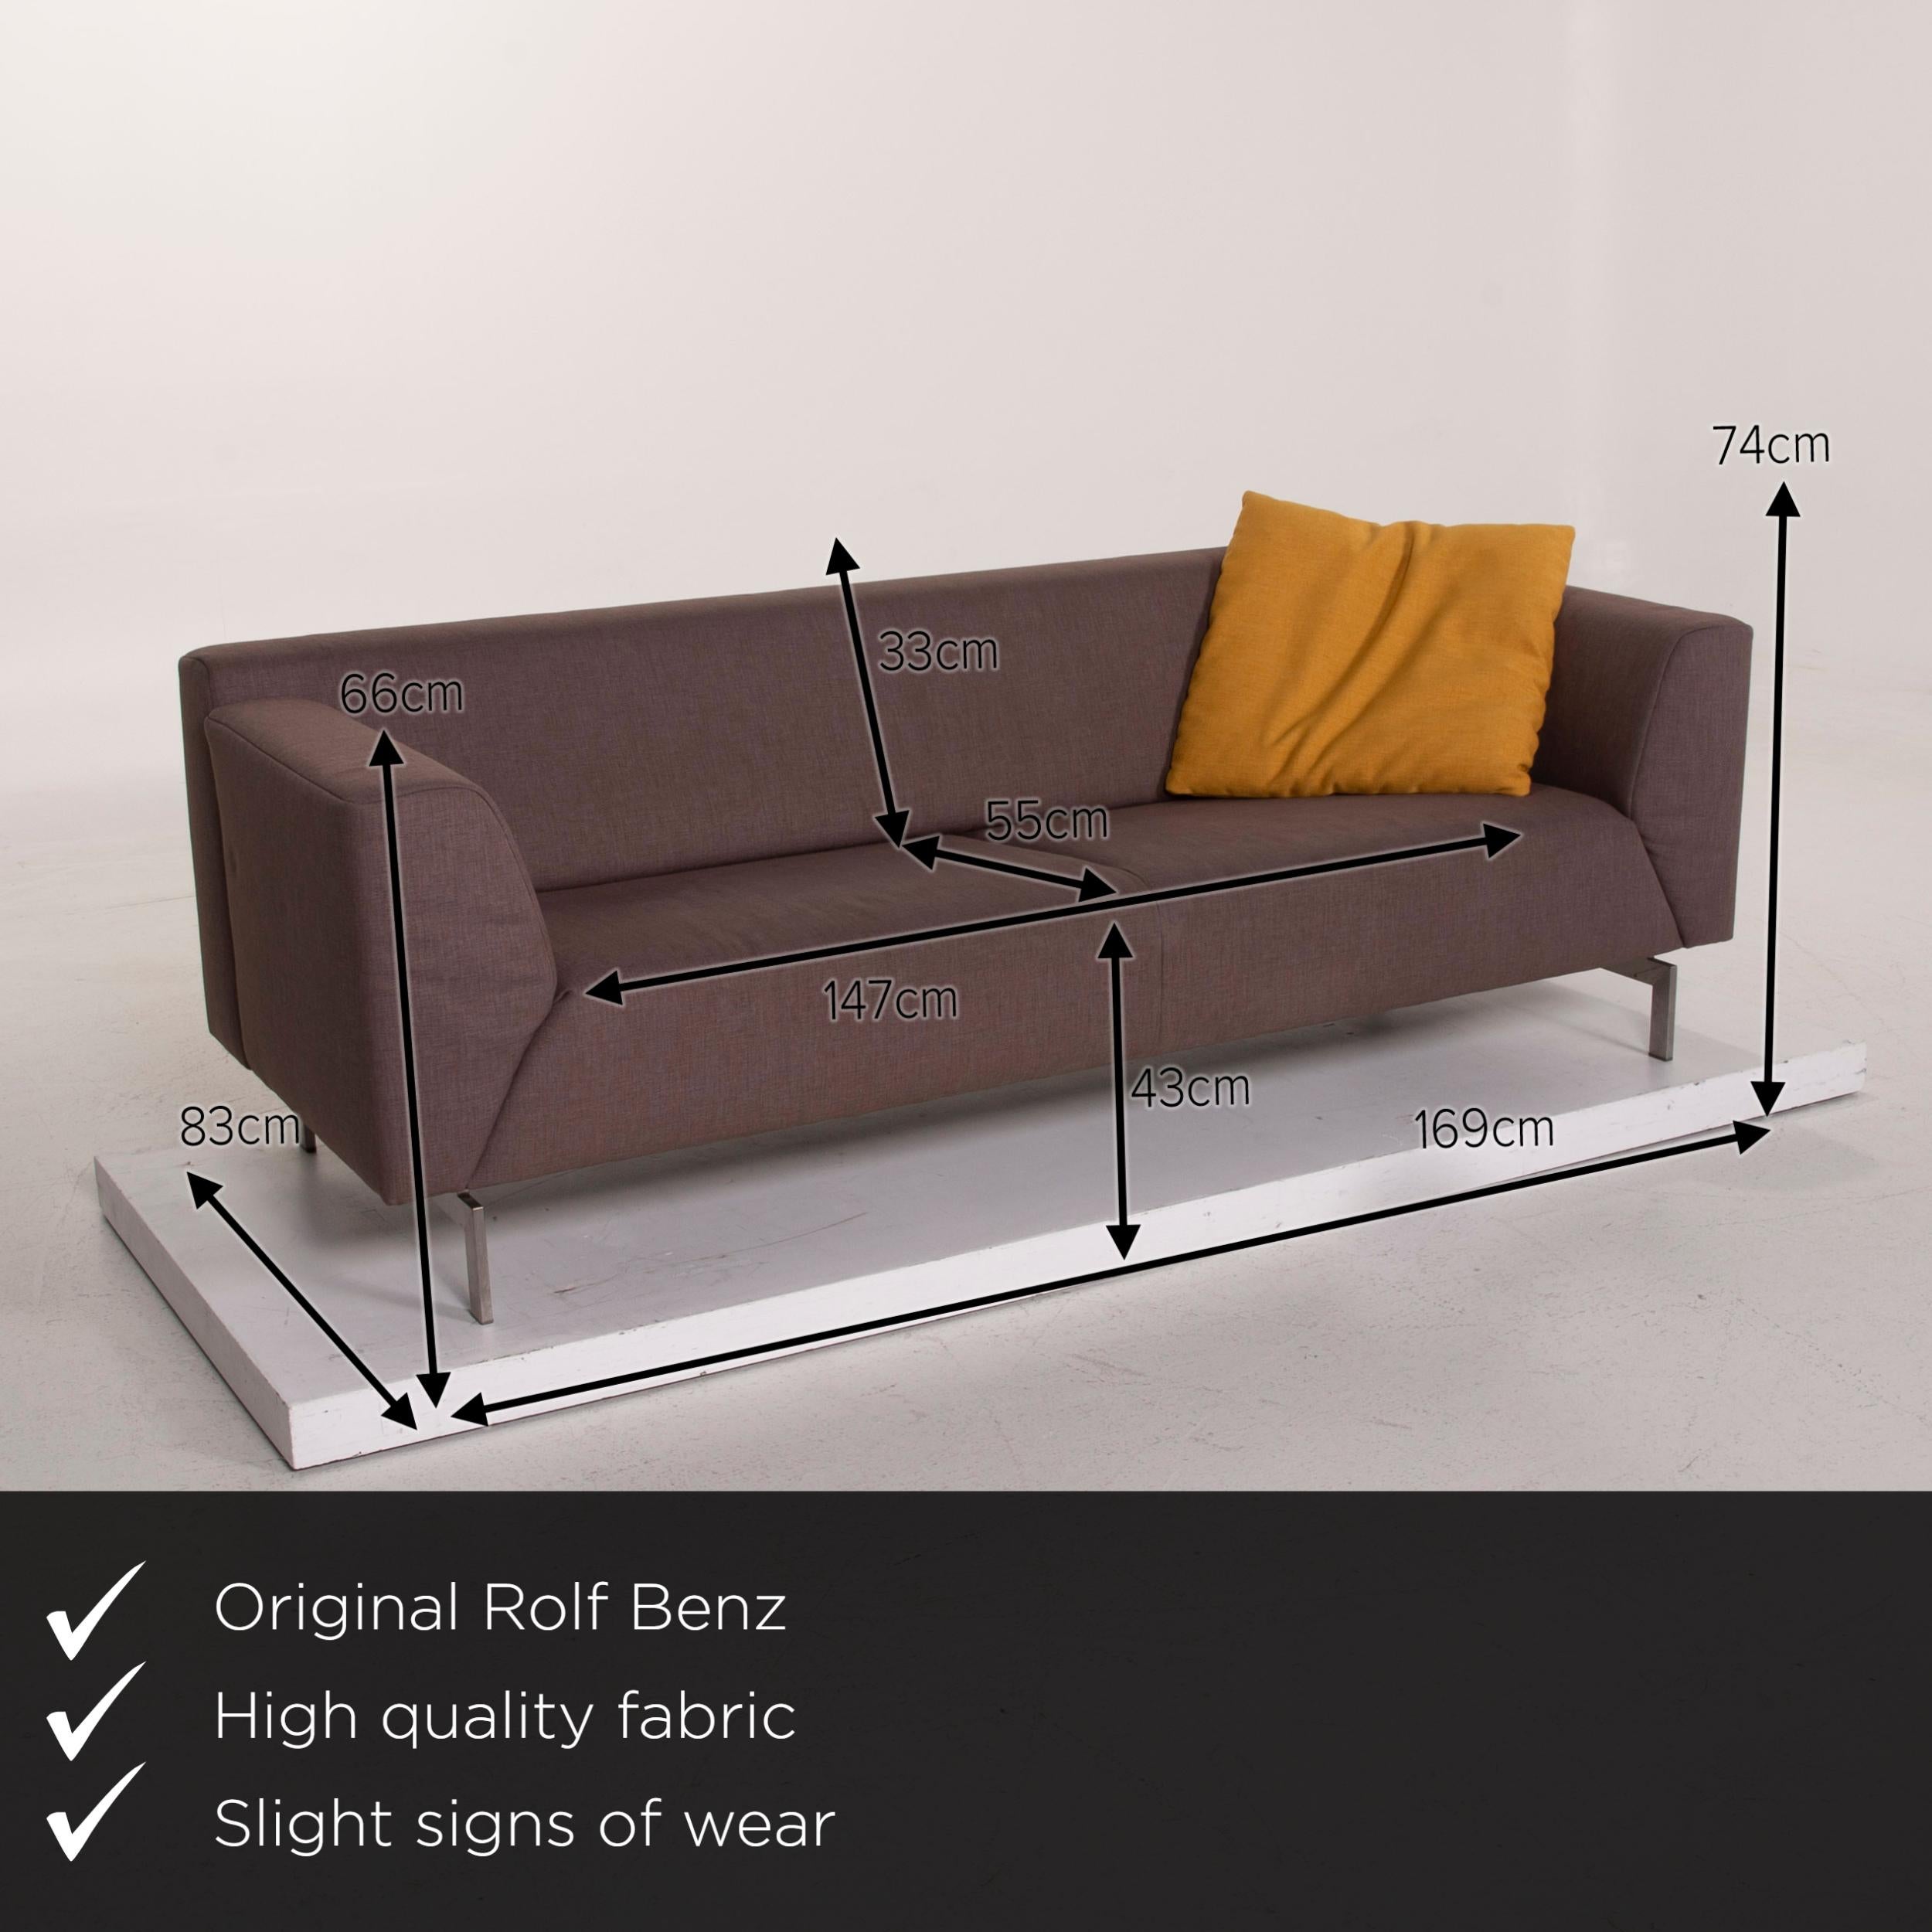 We present to you a Rolf Benz 318 Linea fabric sofa gray two-seat.

 

 Product measurements in centimeters:
 

Depth 83
Width 215
Height 74
Seat height 43
Rest height 86
Seat depth 55
Seat width 168
Back height 33.